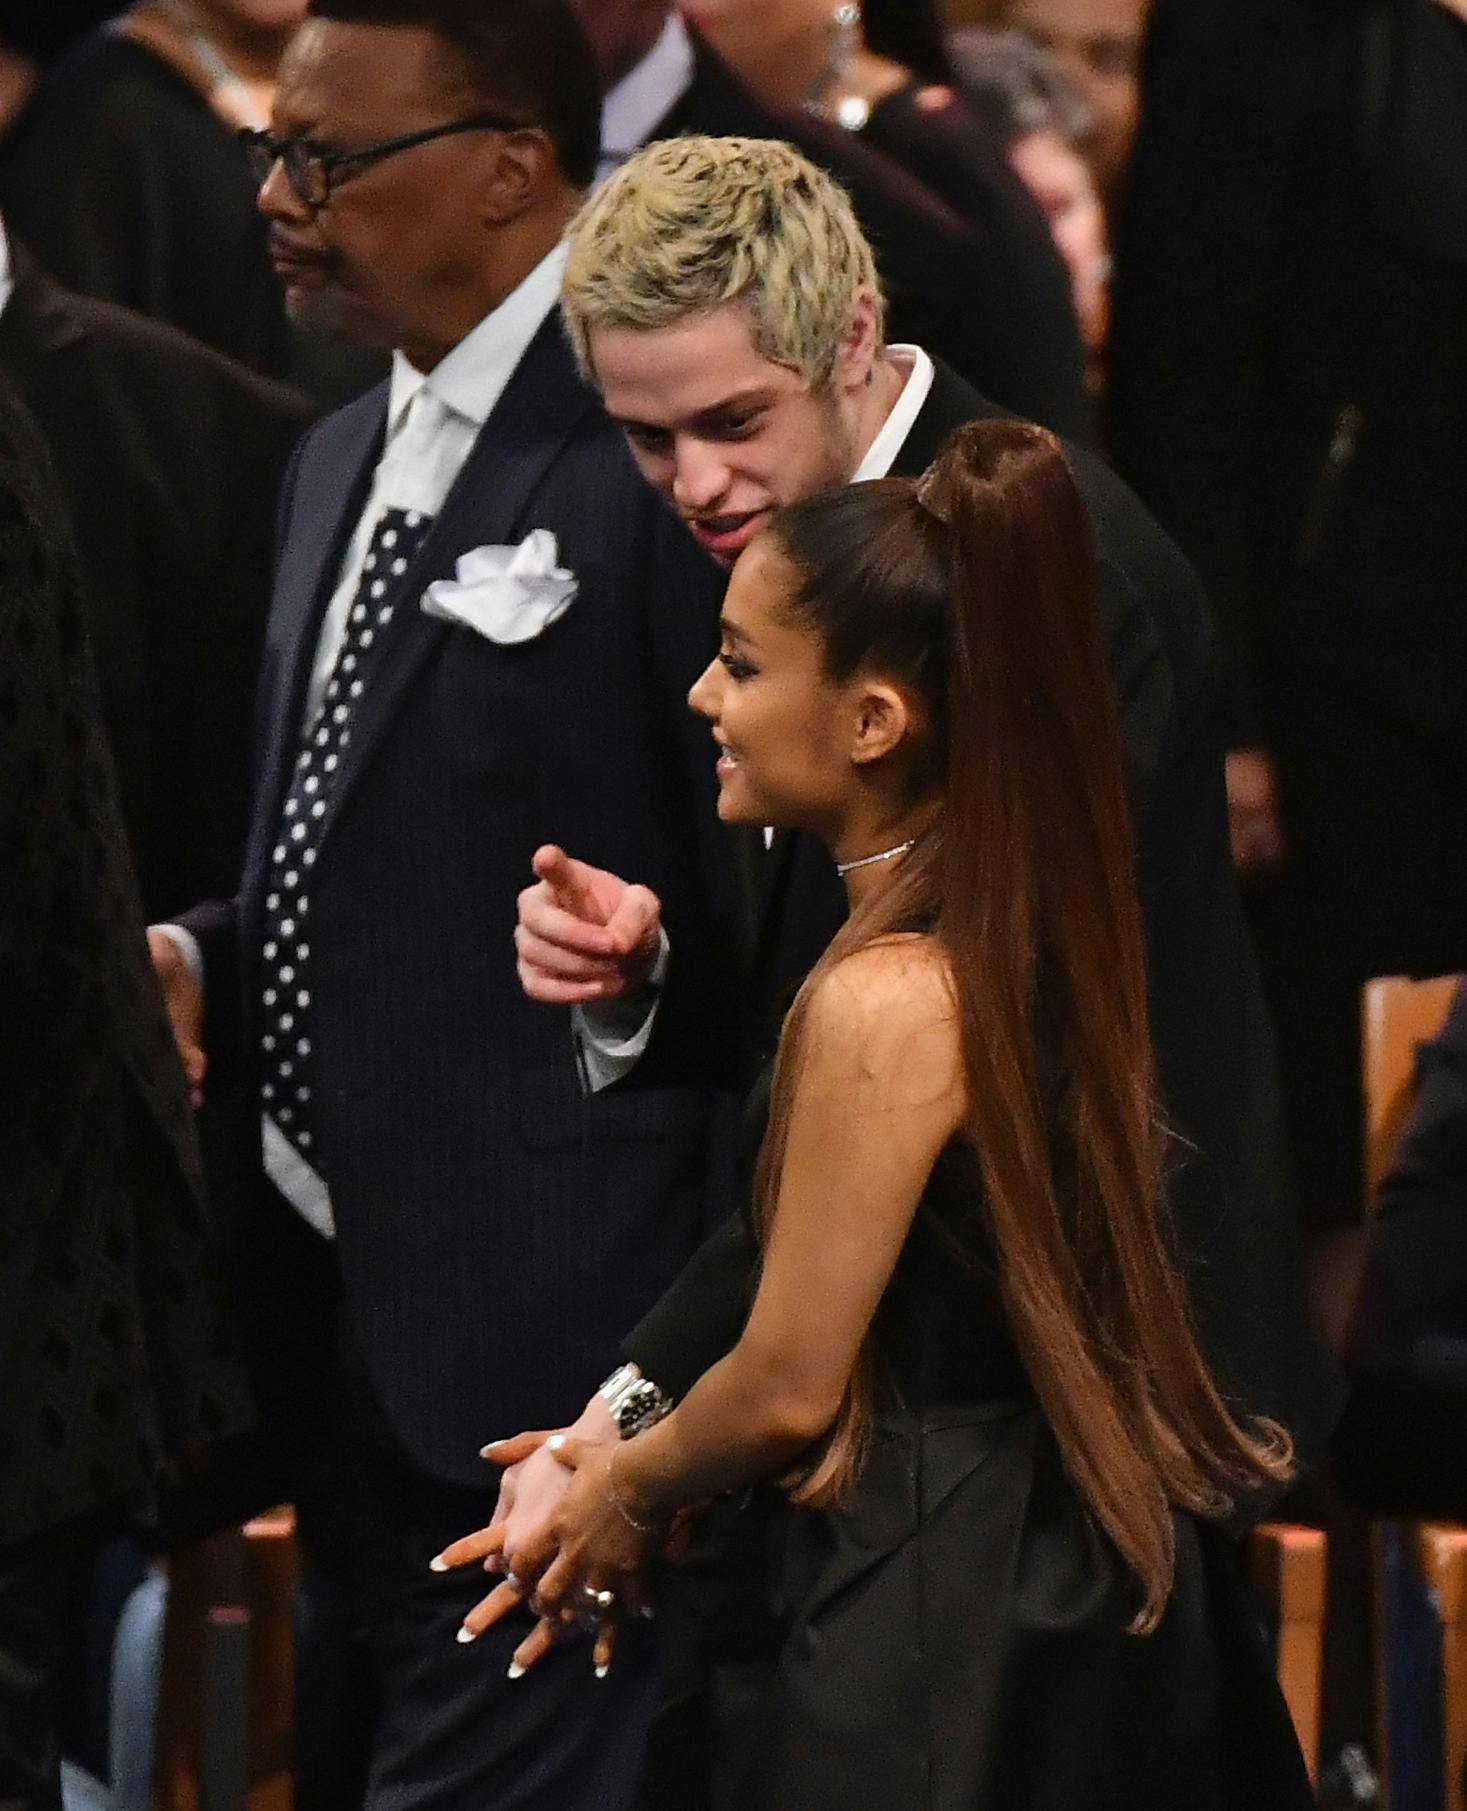 Singer Ariana Grande and her fiancee Pete Davidson attend Aretha Franklin's funeral at Greater Grace Temple on August 31, 2018 in Detroit, Michigan. (Photo by Angela Weiss / AFP)